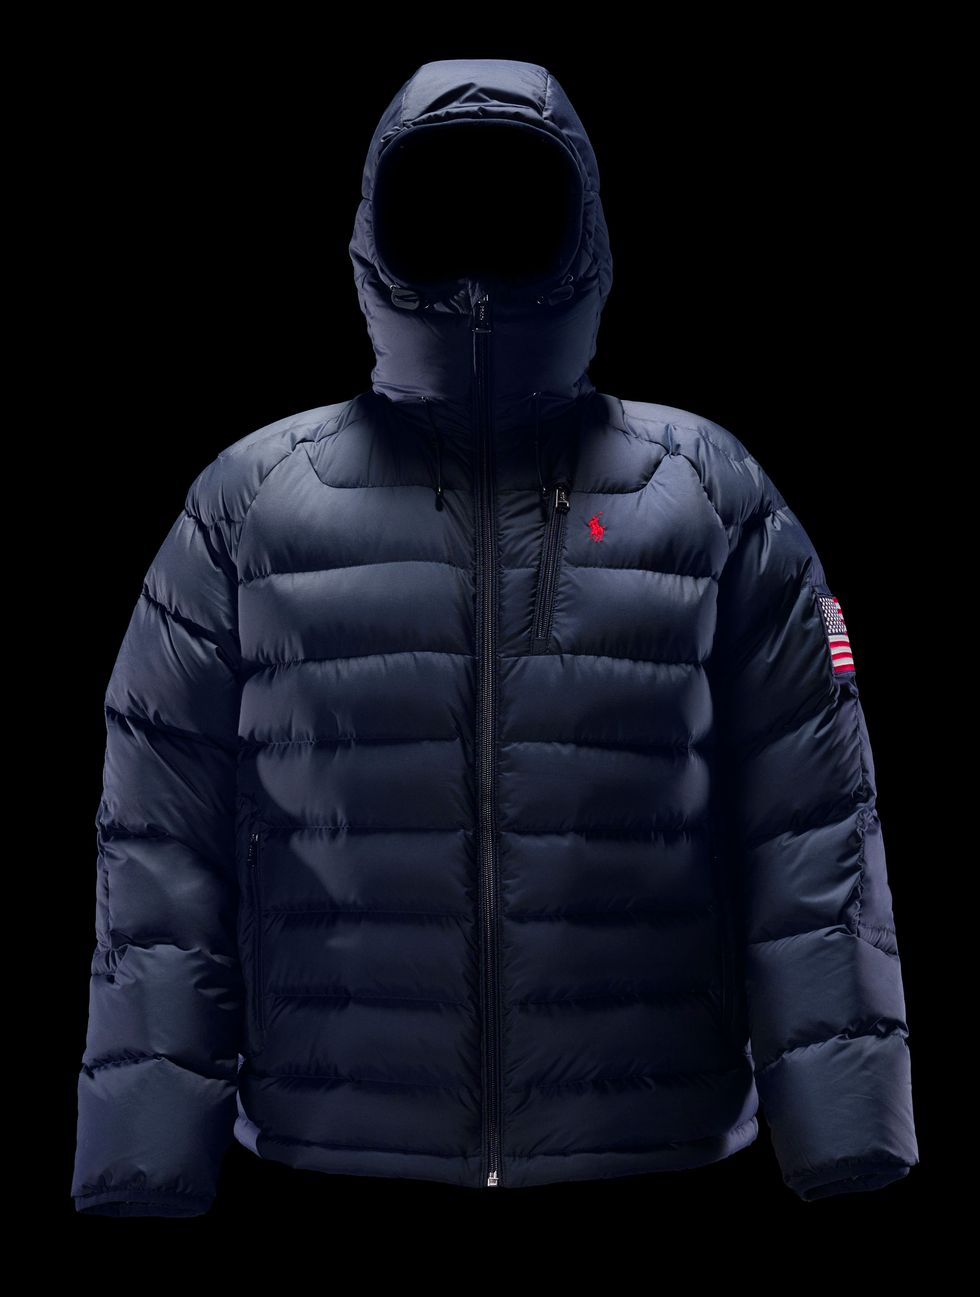 Ralph Lauren Launches Heated Polo 11 and Glacier Down Jackets